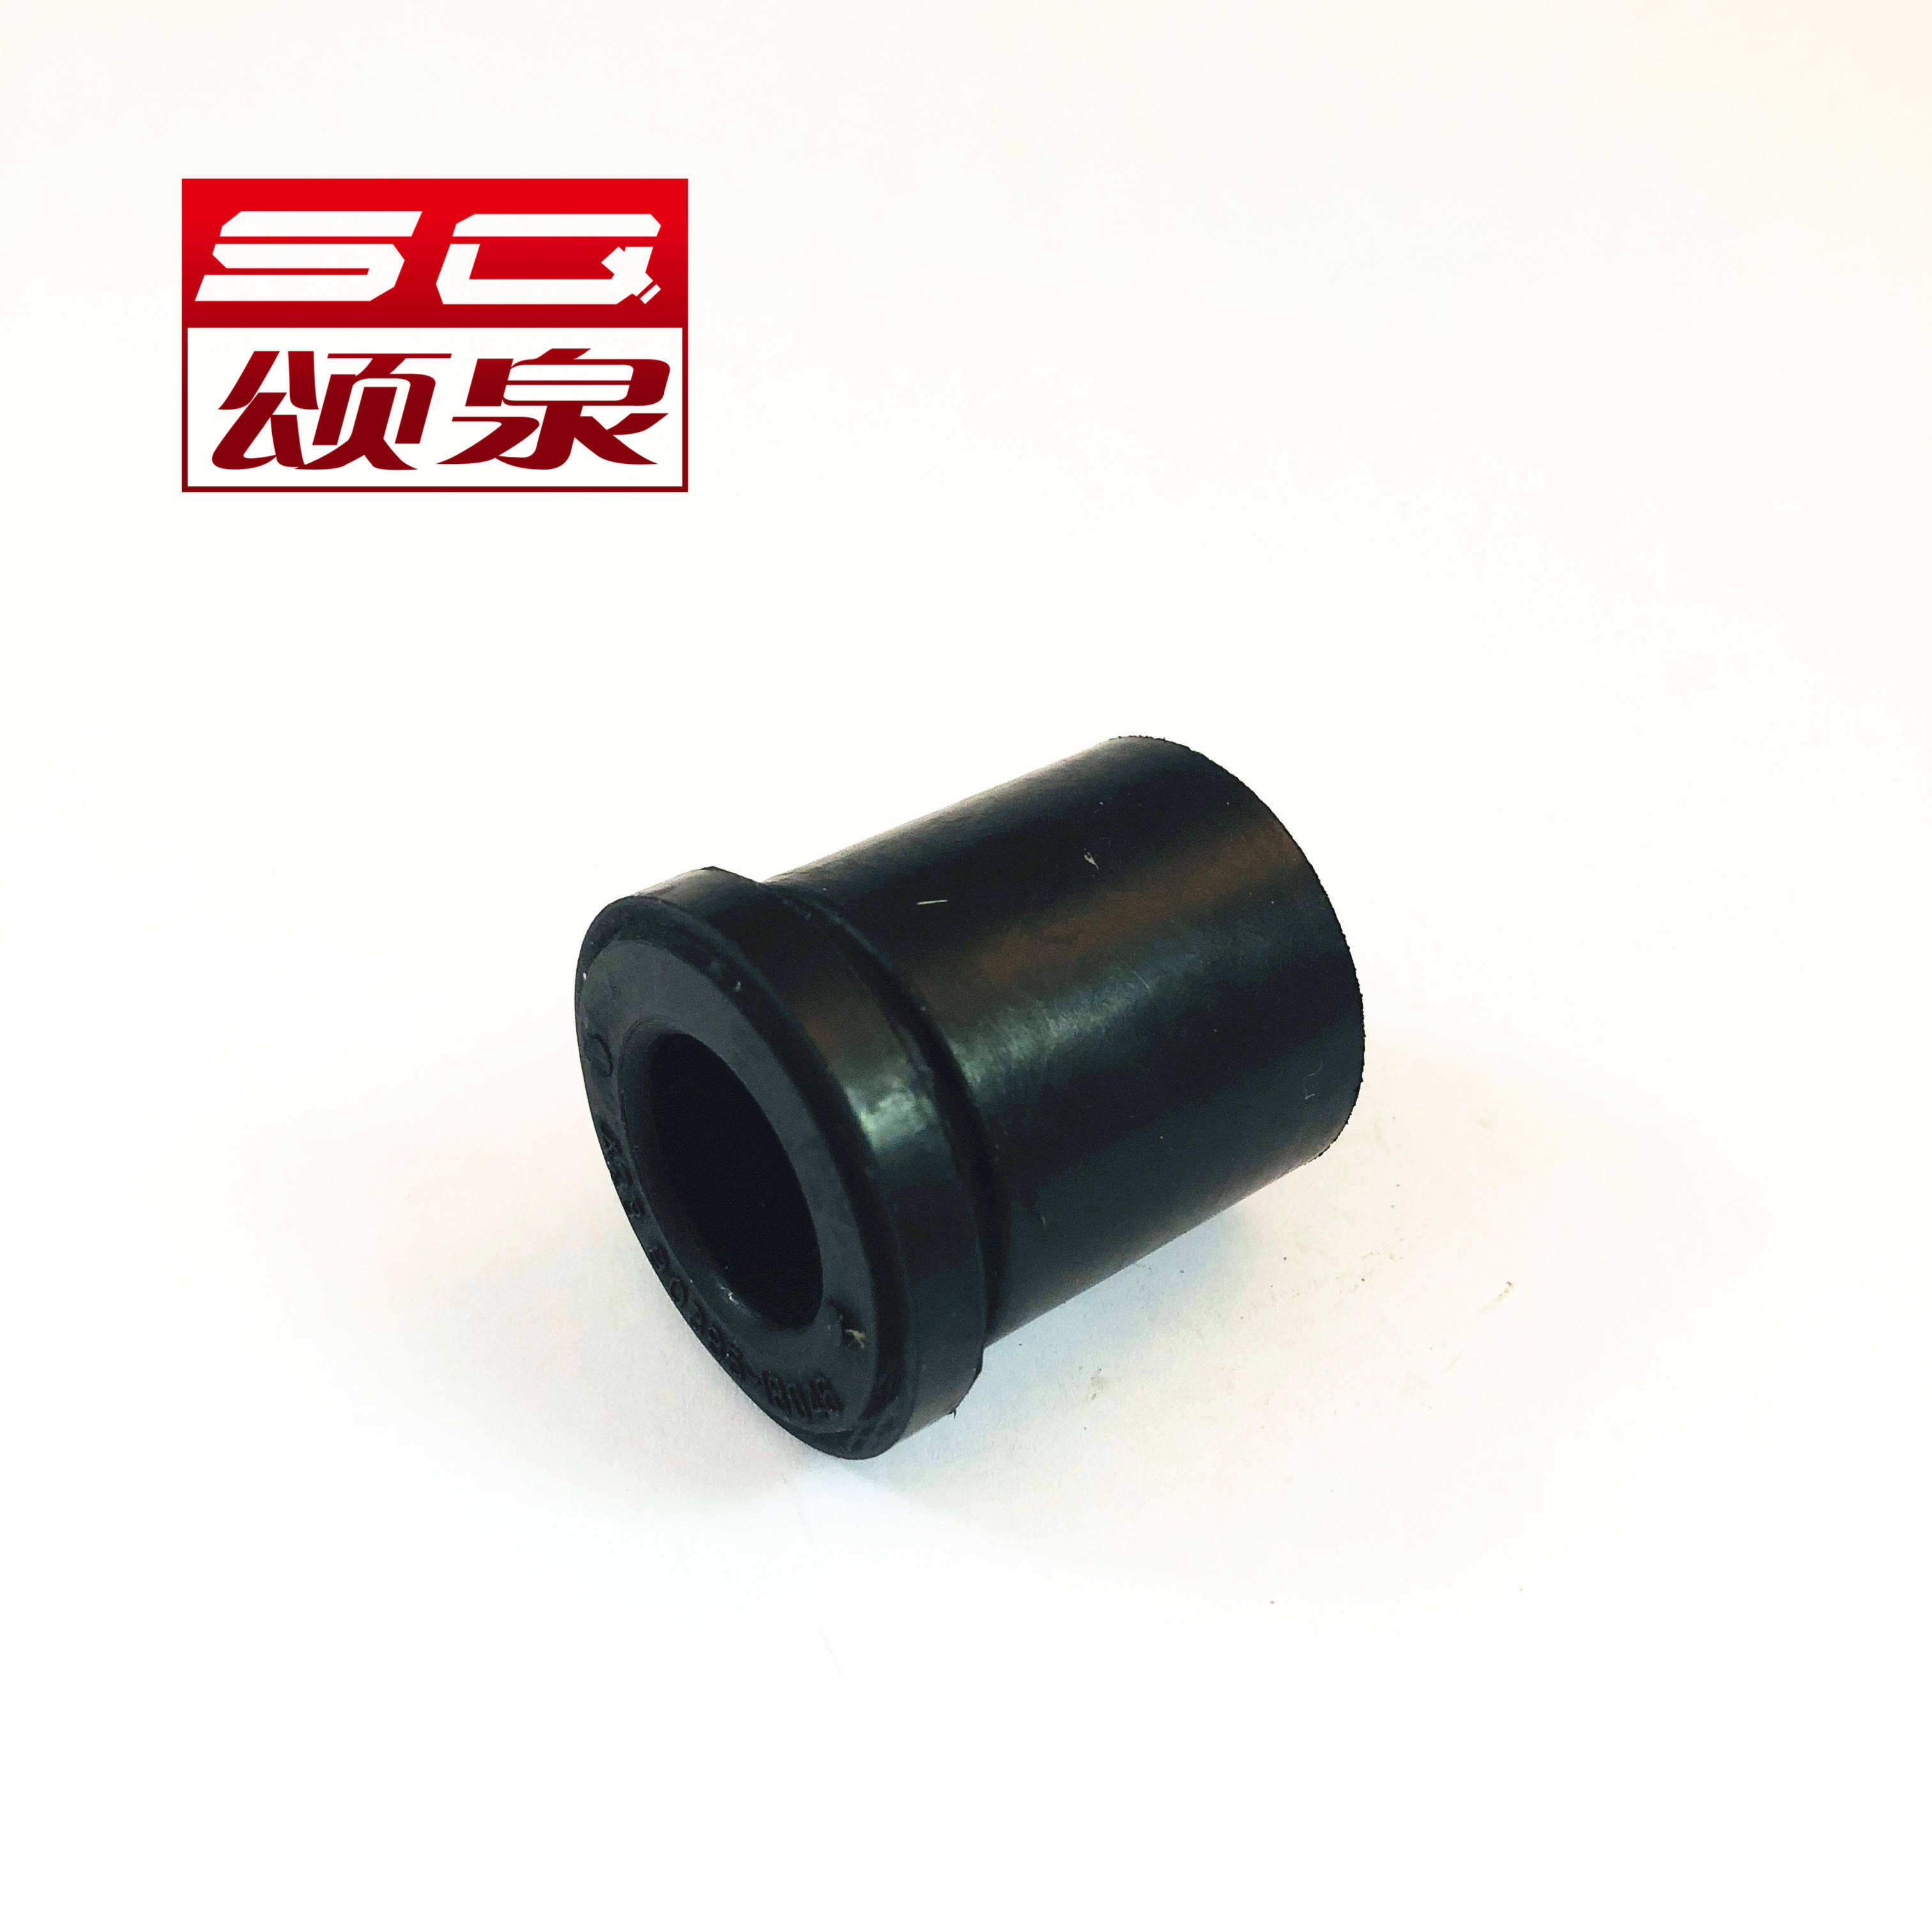 90385-18046 90385-18003 Stabilizer Bushing for Toyota Hilux Pickup High Quality Rubber Bushing